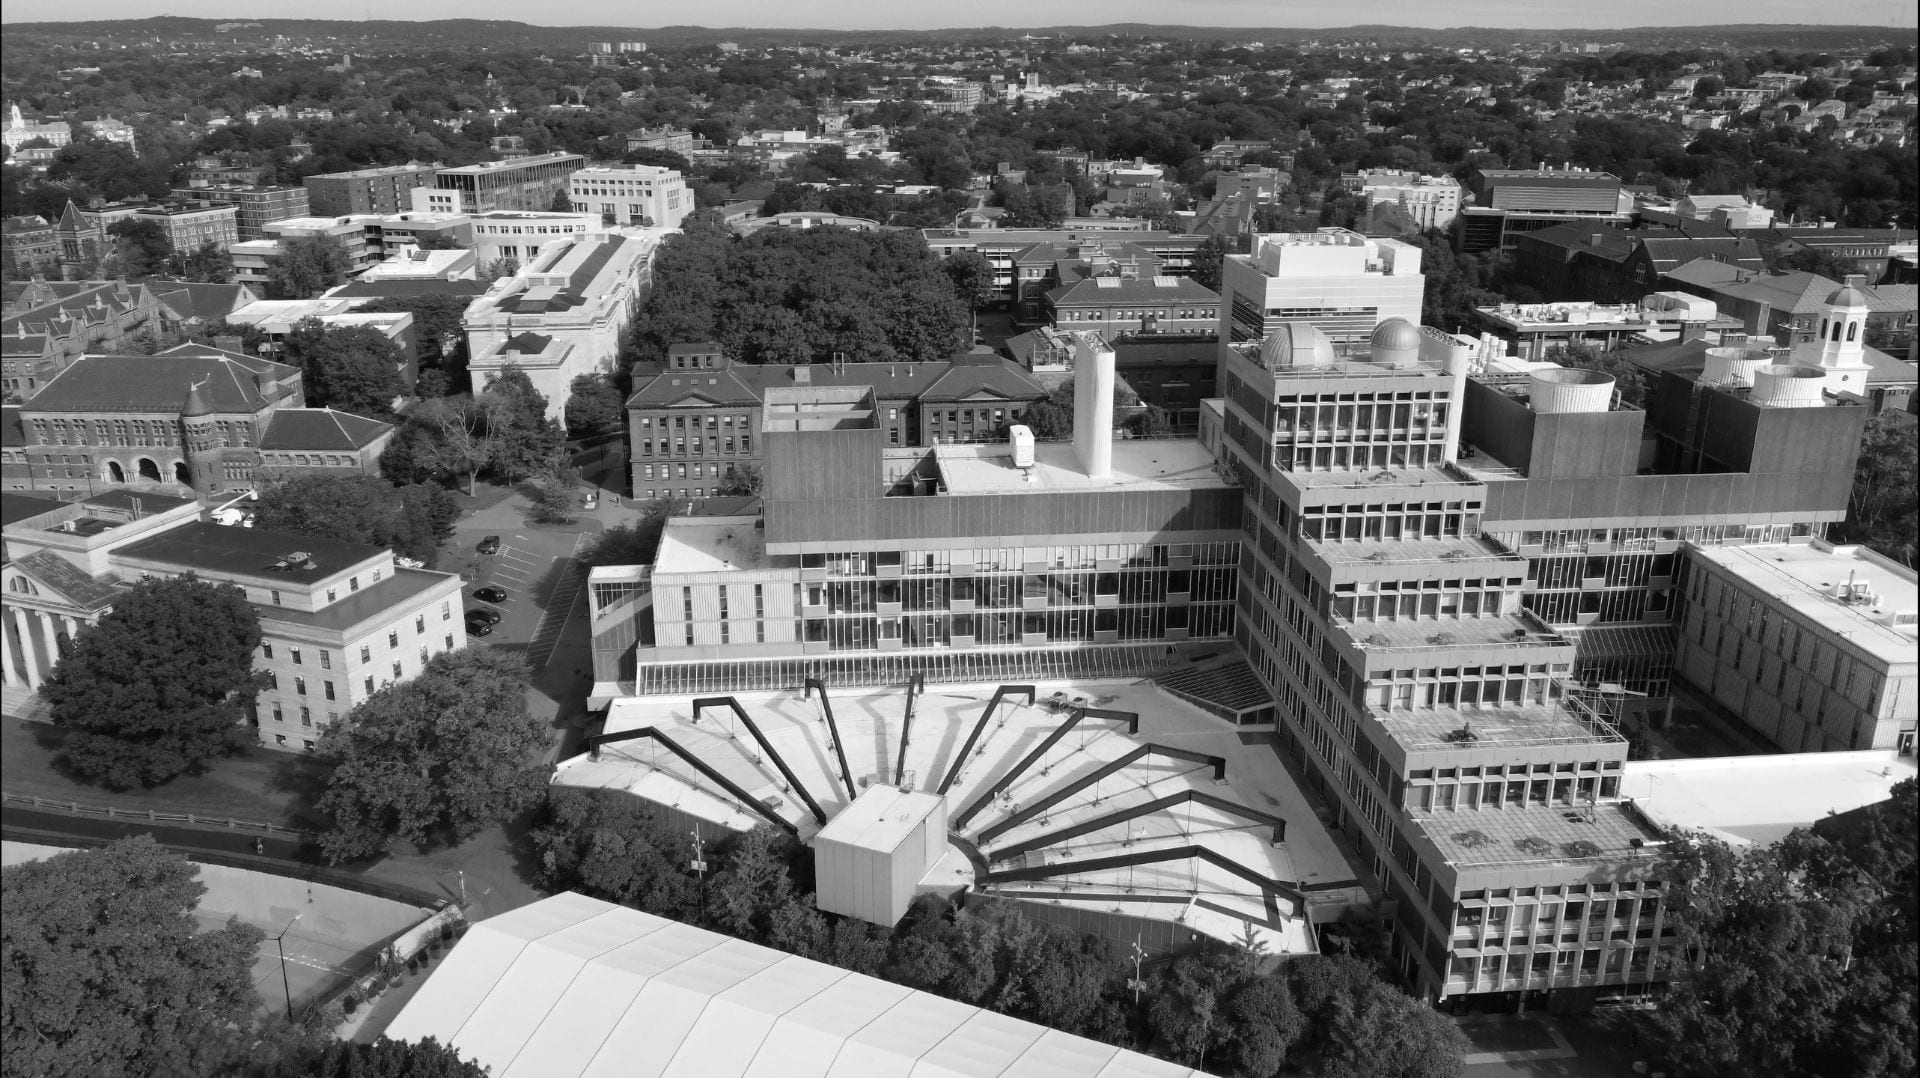 An aerial black and white photo of the Harvard University campus with a focus on the Science Center building.